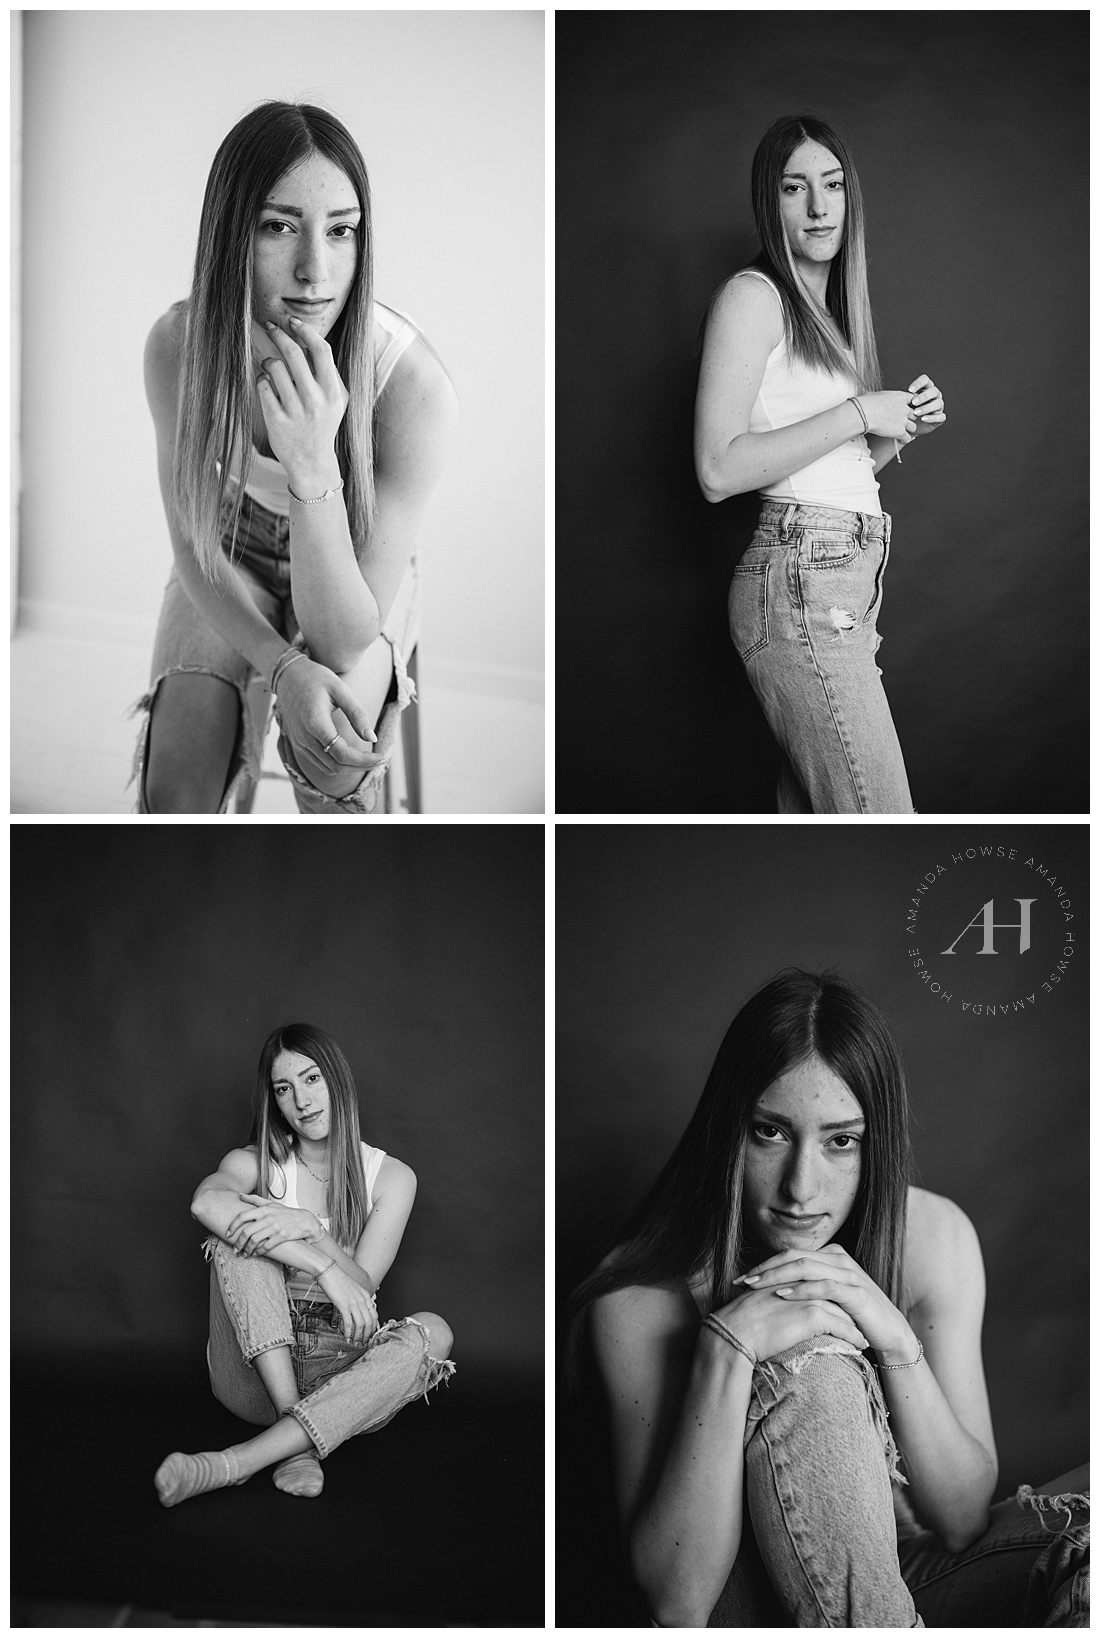 Portraits at Studio 253 | Amanda Howse Photography | Project Beauty Campaign for High School Seniors to Feel Confident and Empowered